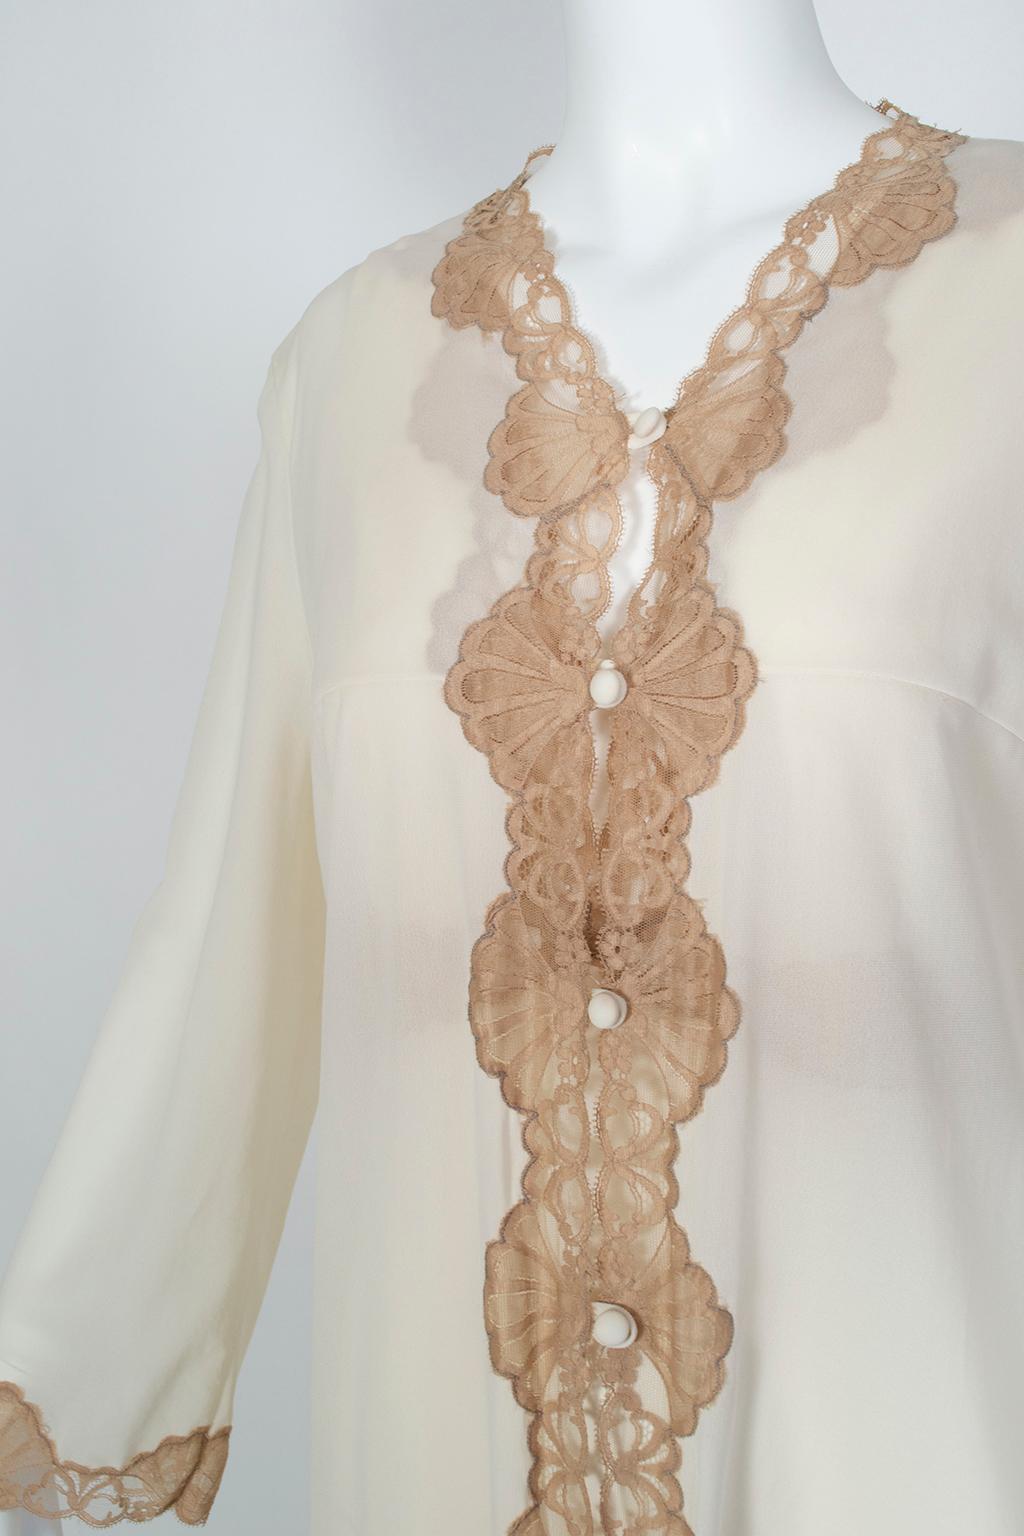 Emilio Pucci Formfit Rogers Ivory Bridal Peignoir Gown and Robe Set – M, 1960s 3